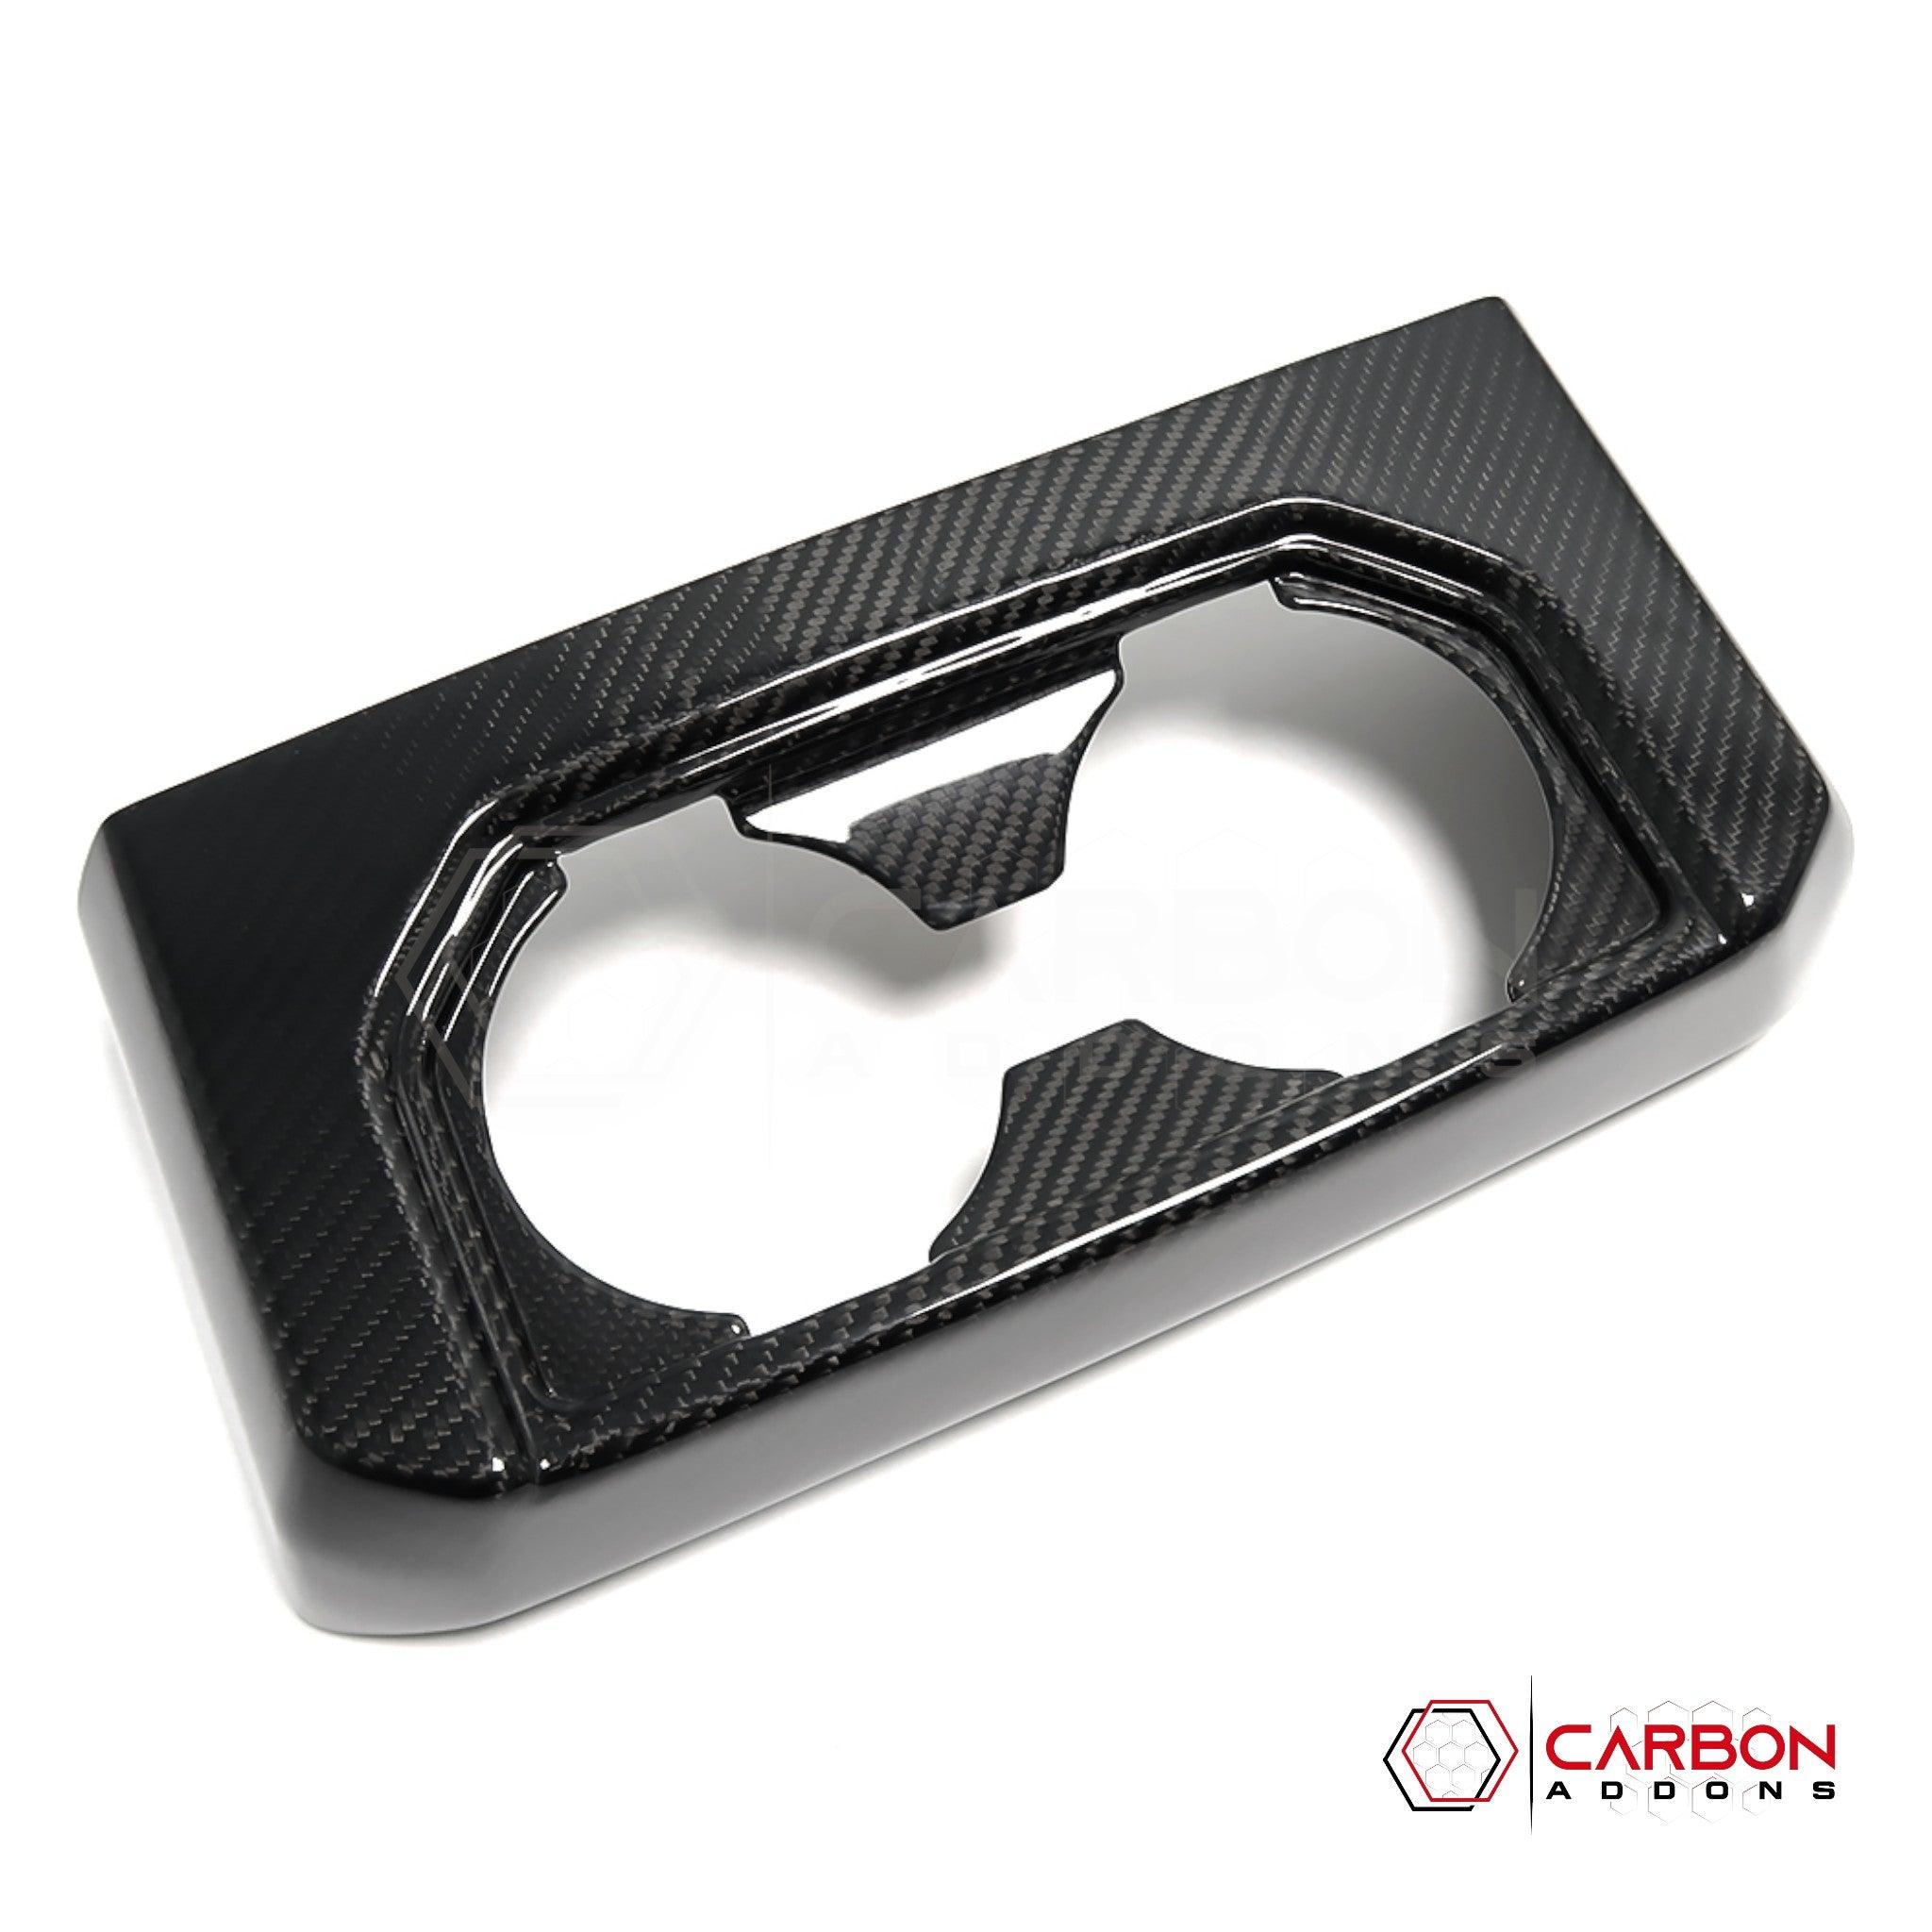 [Coming Soon] Ford F150 2015-2020 Rear Seat Cup Holder Hard Carbon Fiber Cover - carbonaddons Carbon Fiber Parts, Accessories, Upgrades, Mods